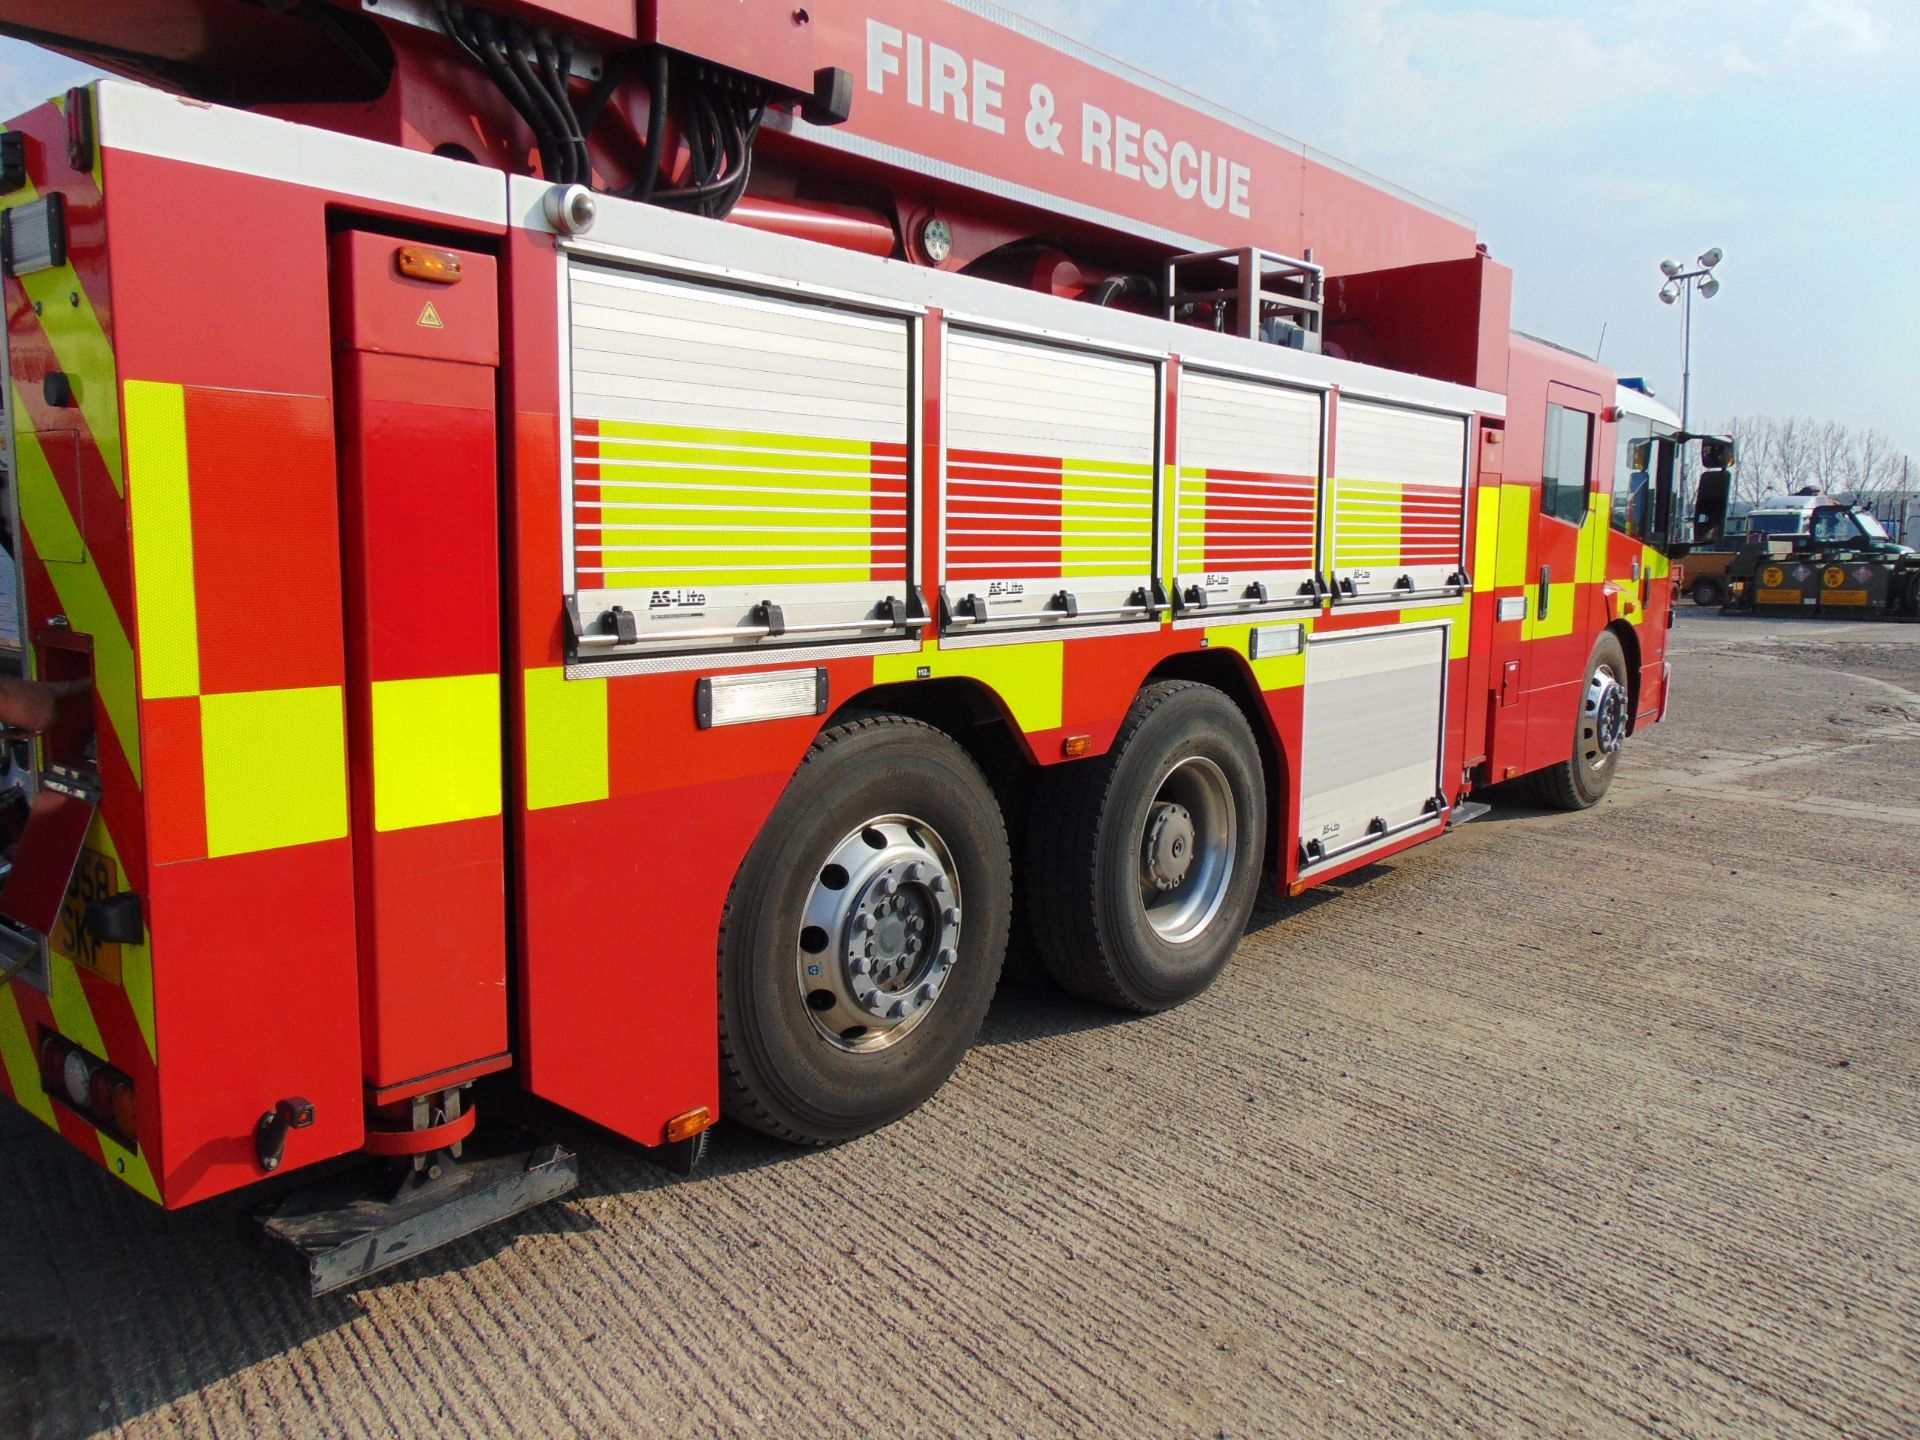 2008 Mercedes Econic CARP (Combined Aerial Rescue Pump) 6x2 Aerial Work Platform / Fire Appliance - Image 20 of 49